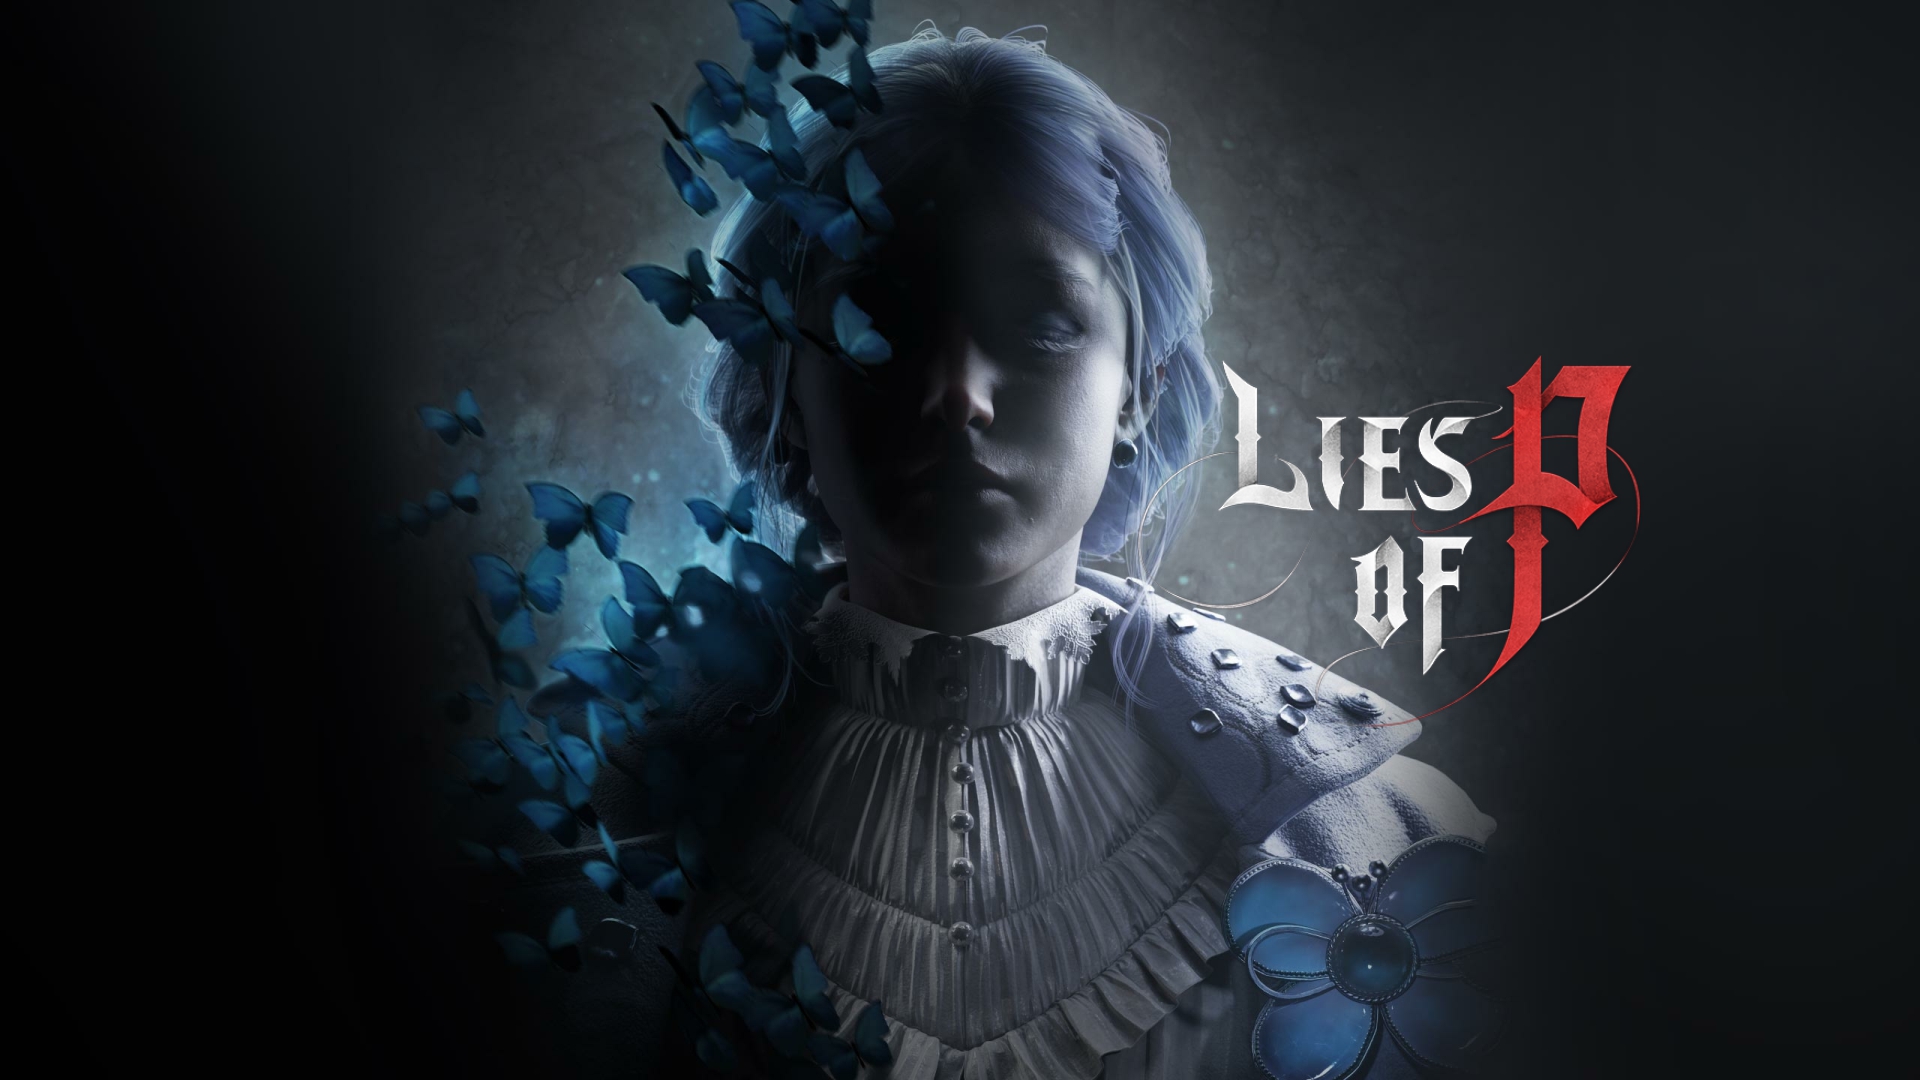 Lies of P Sequel Confirmed, First DLC and Game Update Teased - IGN